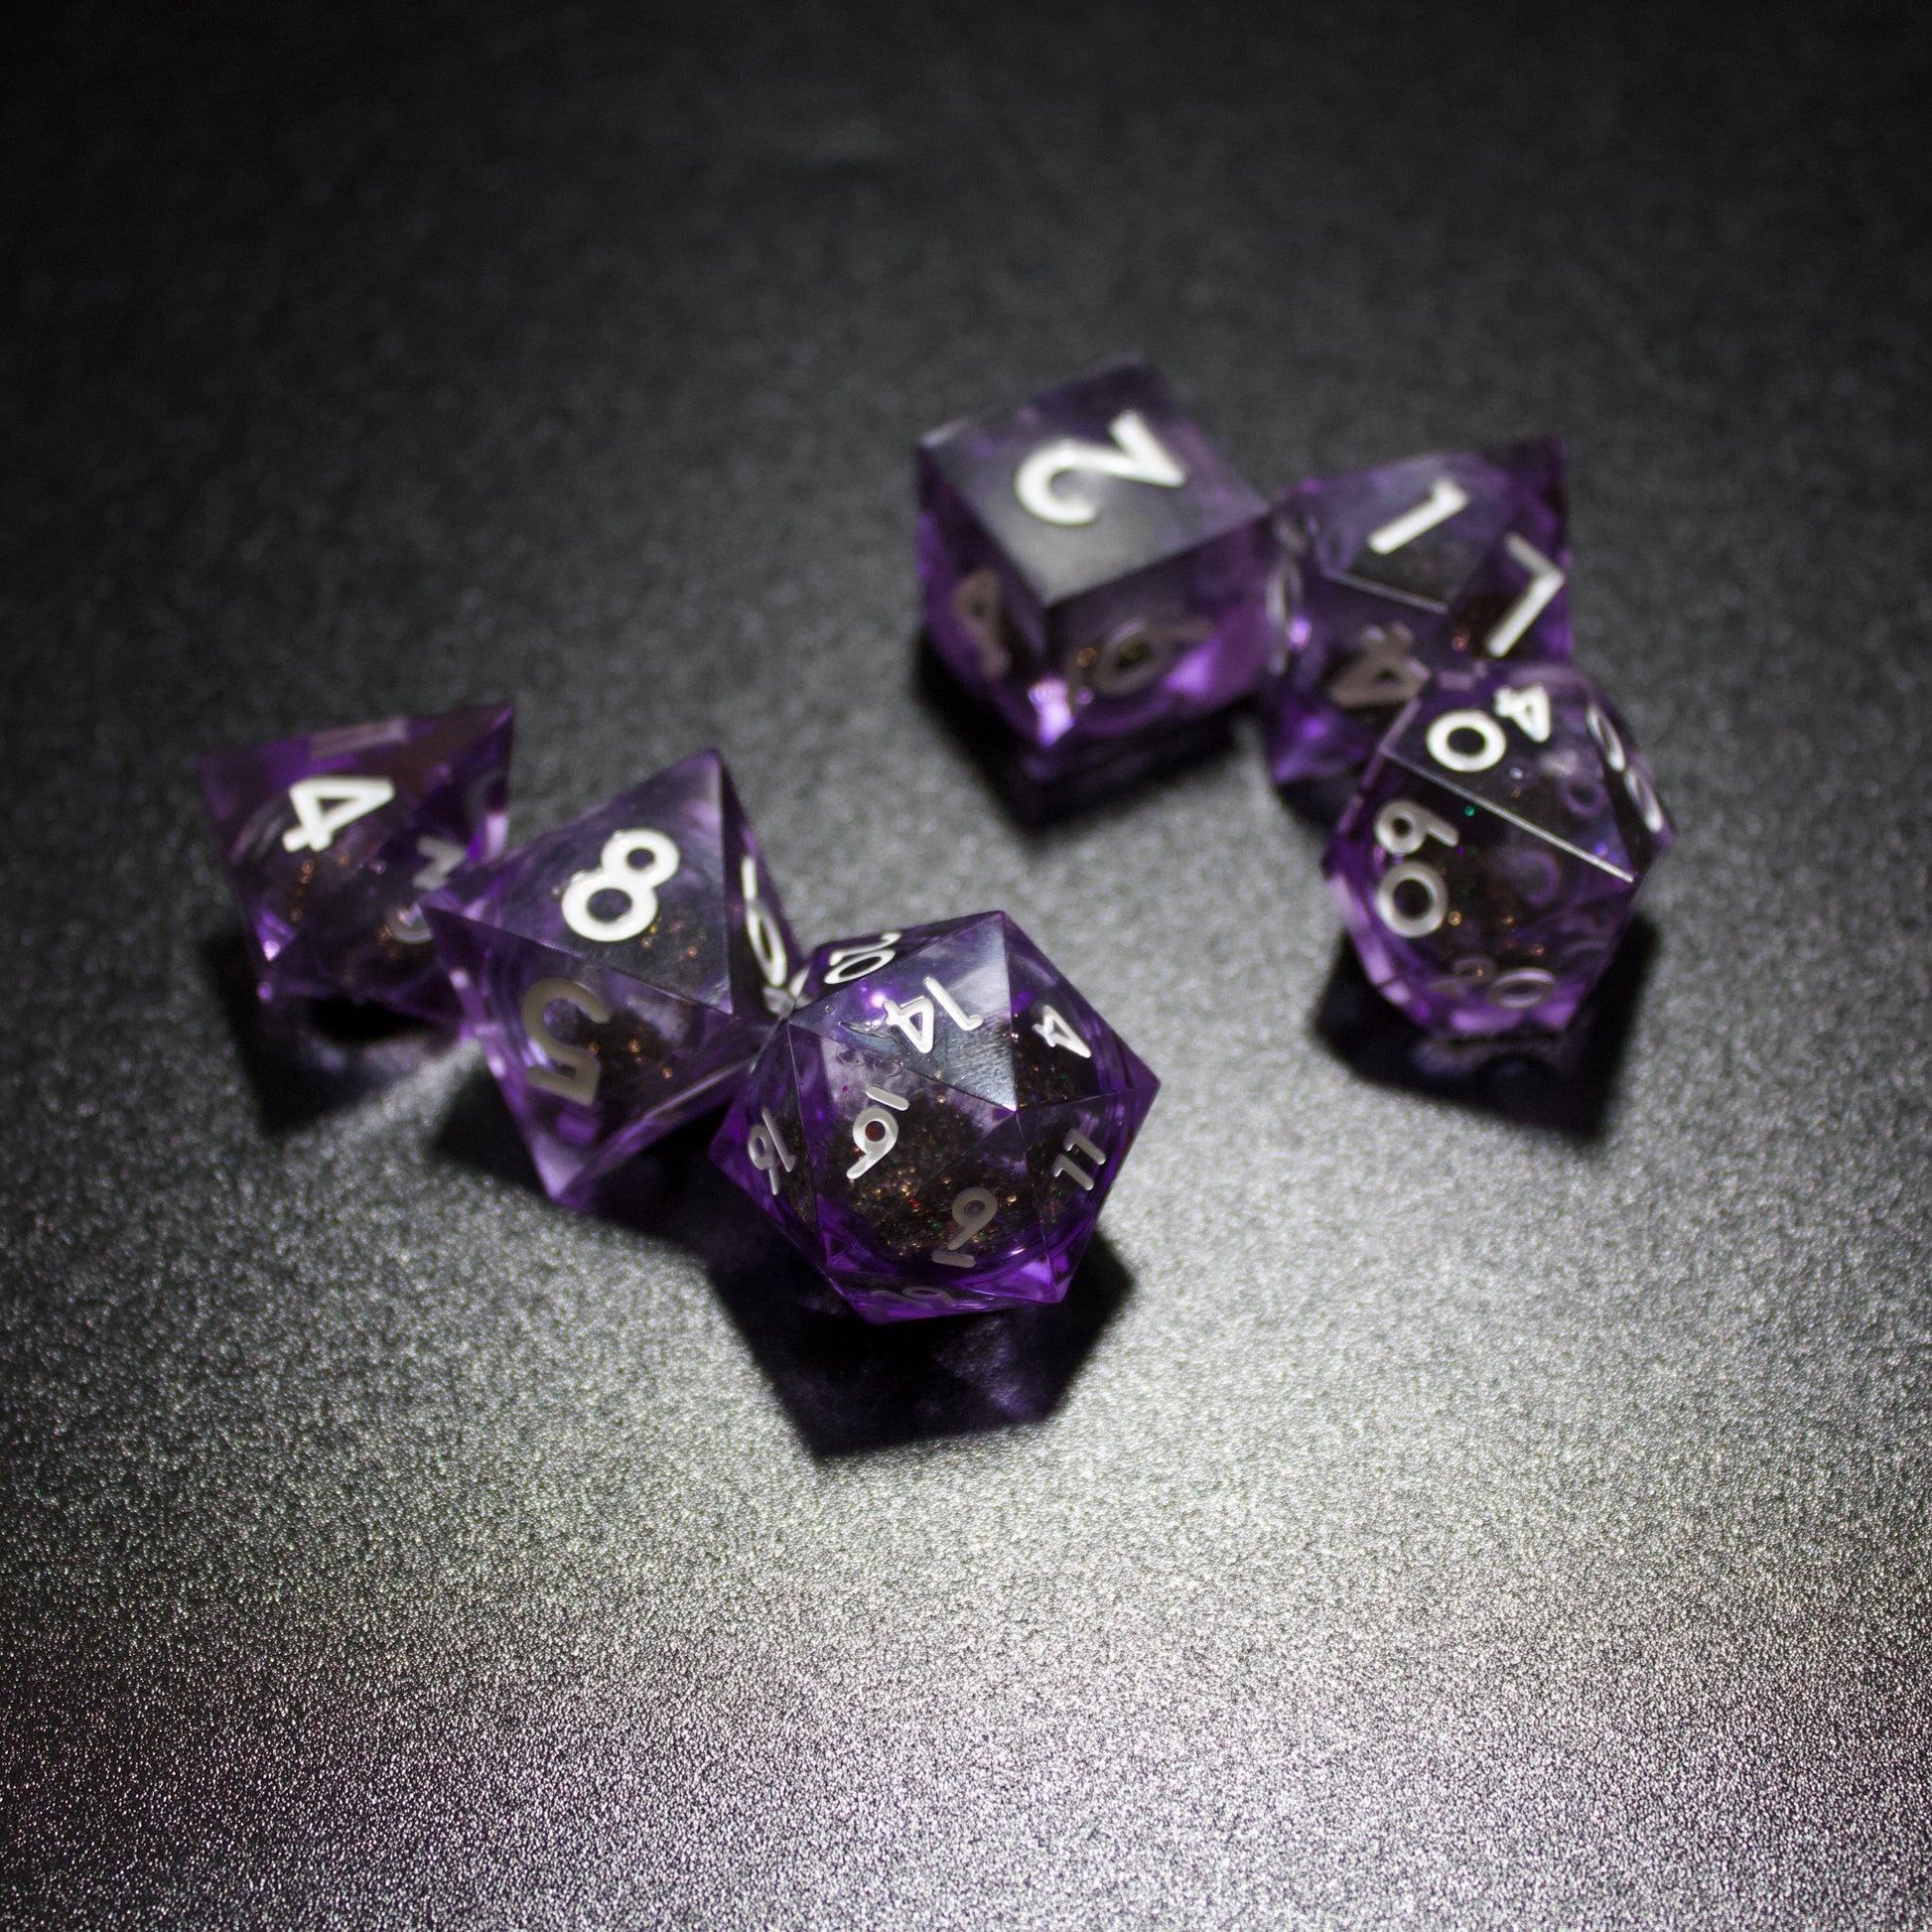 Liquid core sharp edge dnd, TTRPG dice set, dice goblin and critters, role playing games